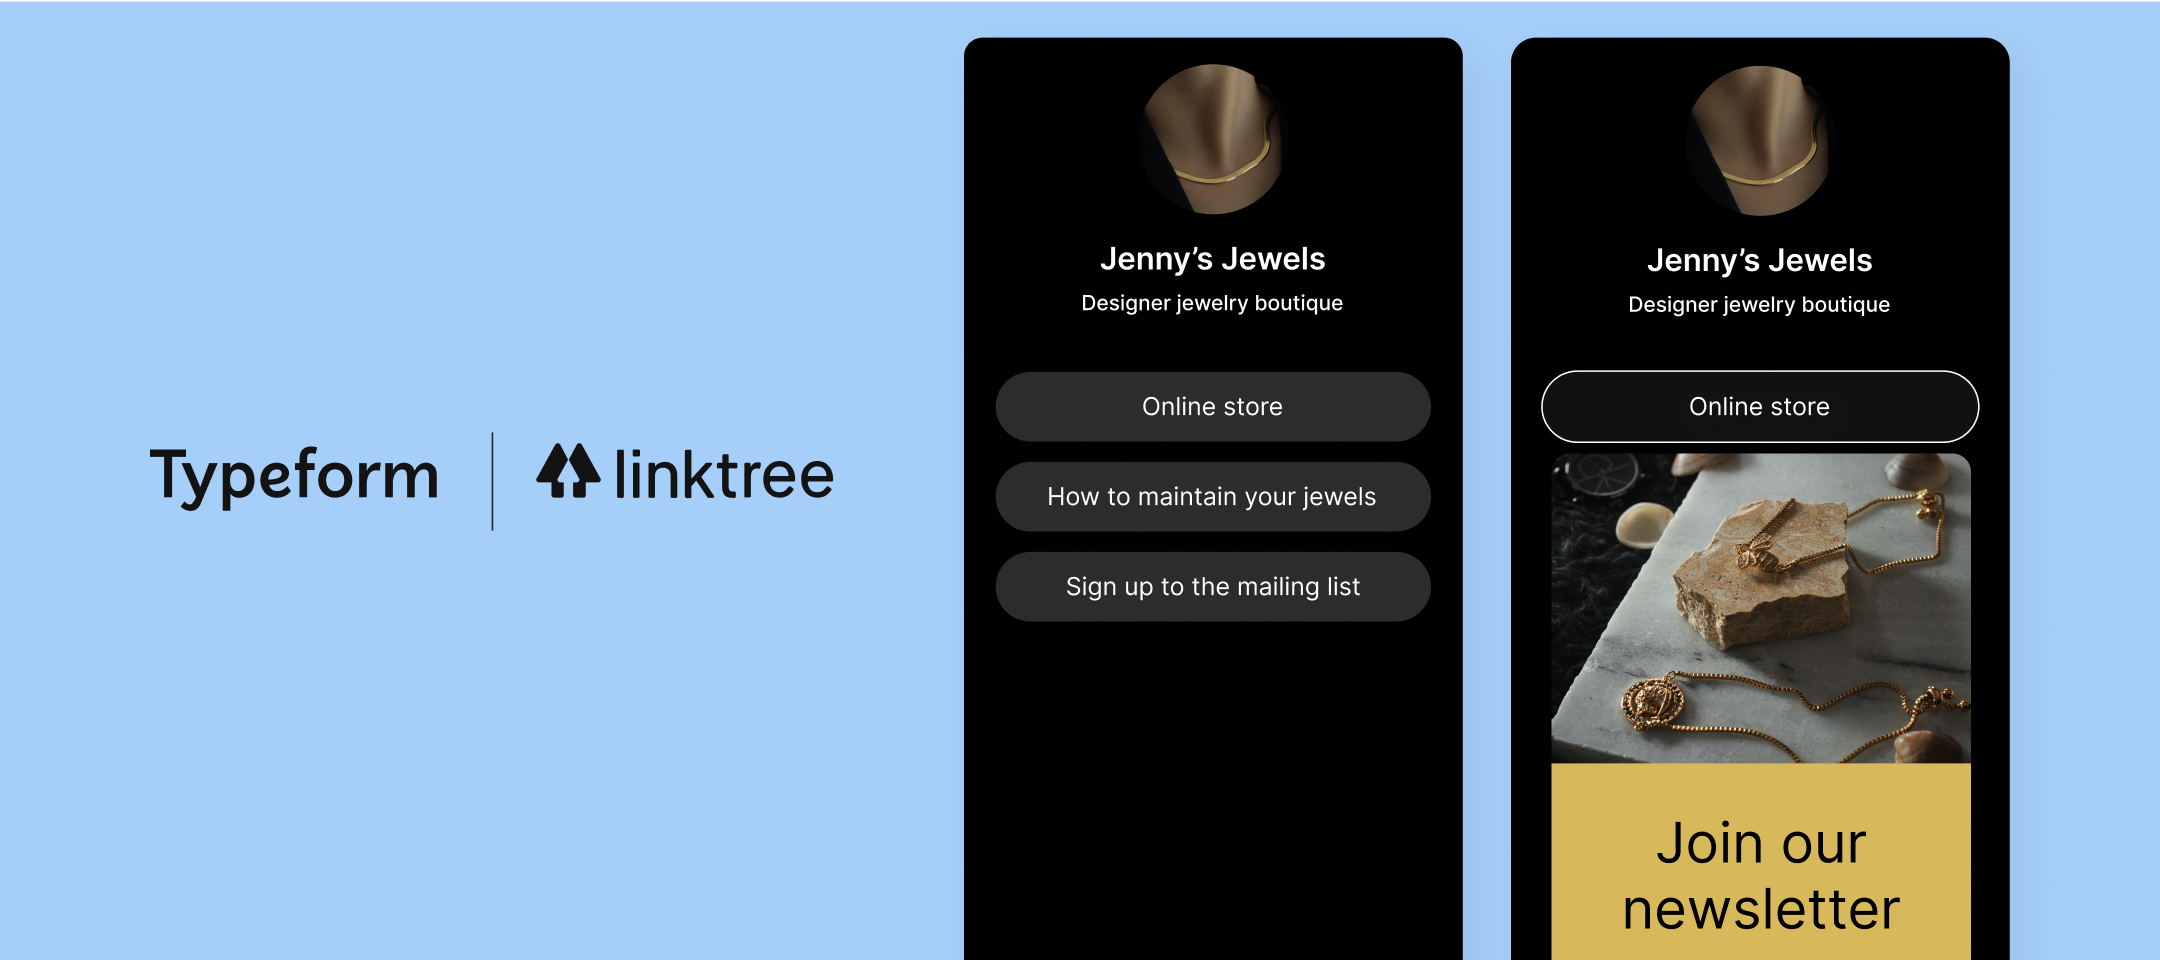 Newly updated - Our Linktree integration 🌳